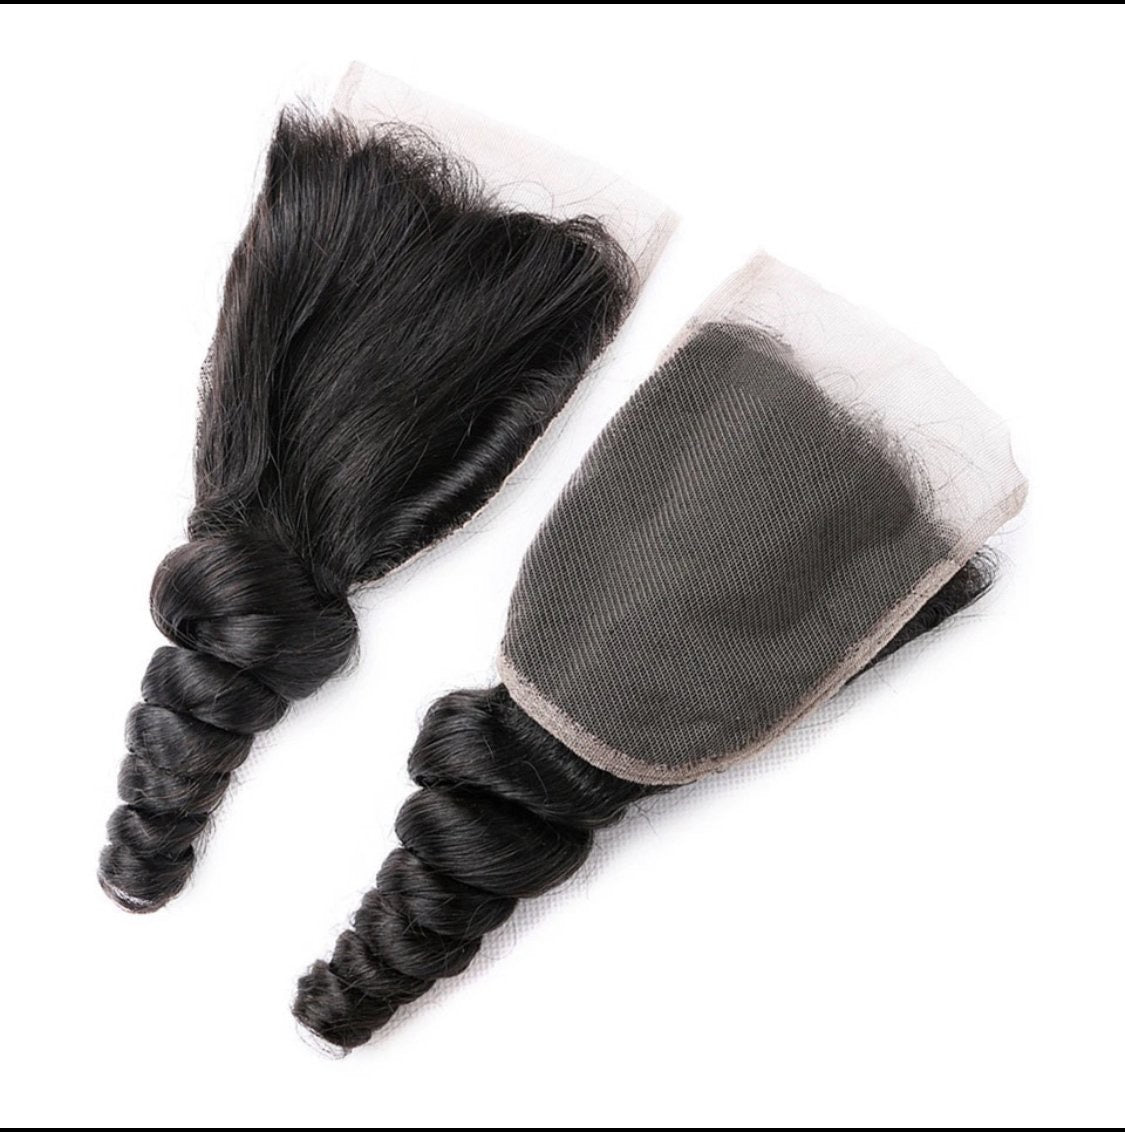 QUICK WEAVE HAIR (READY TO SHIP)